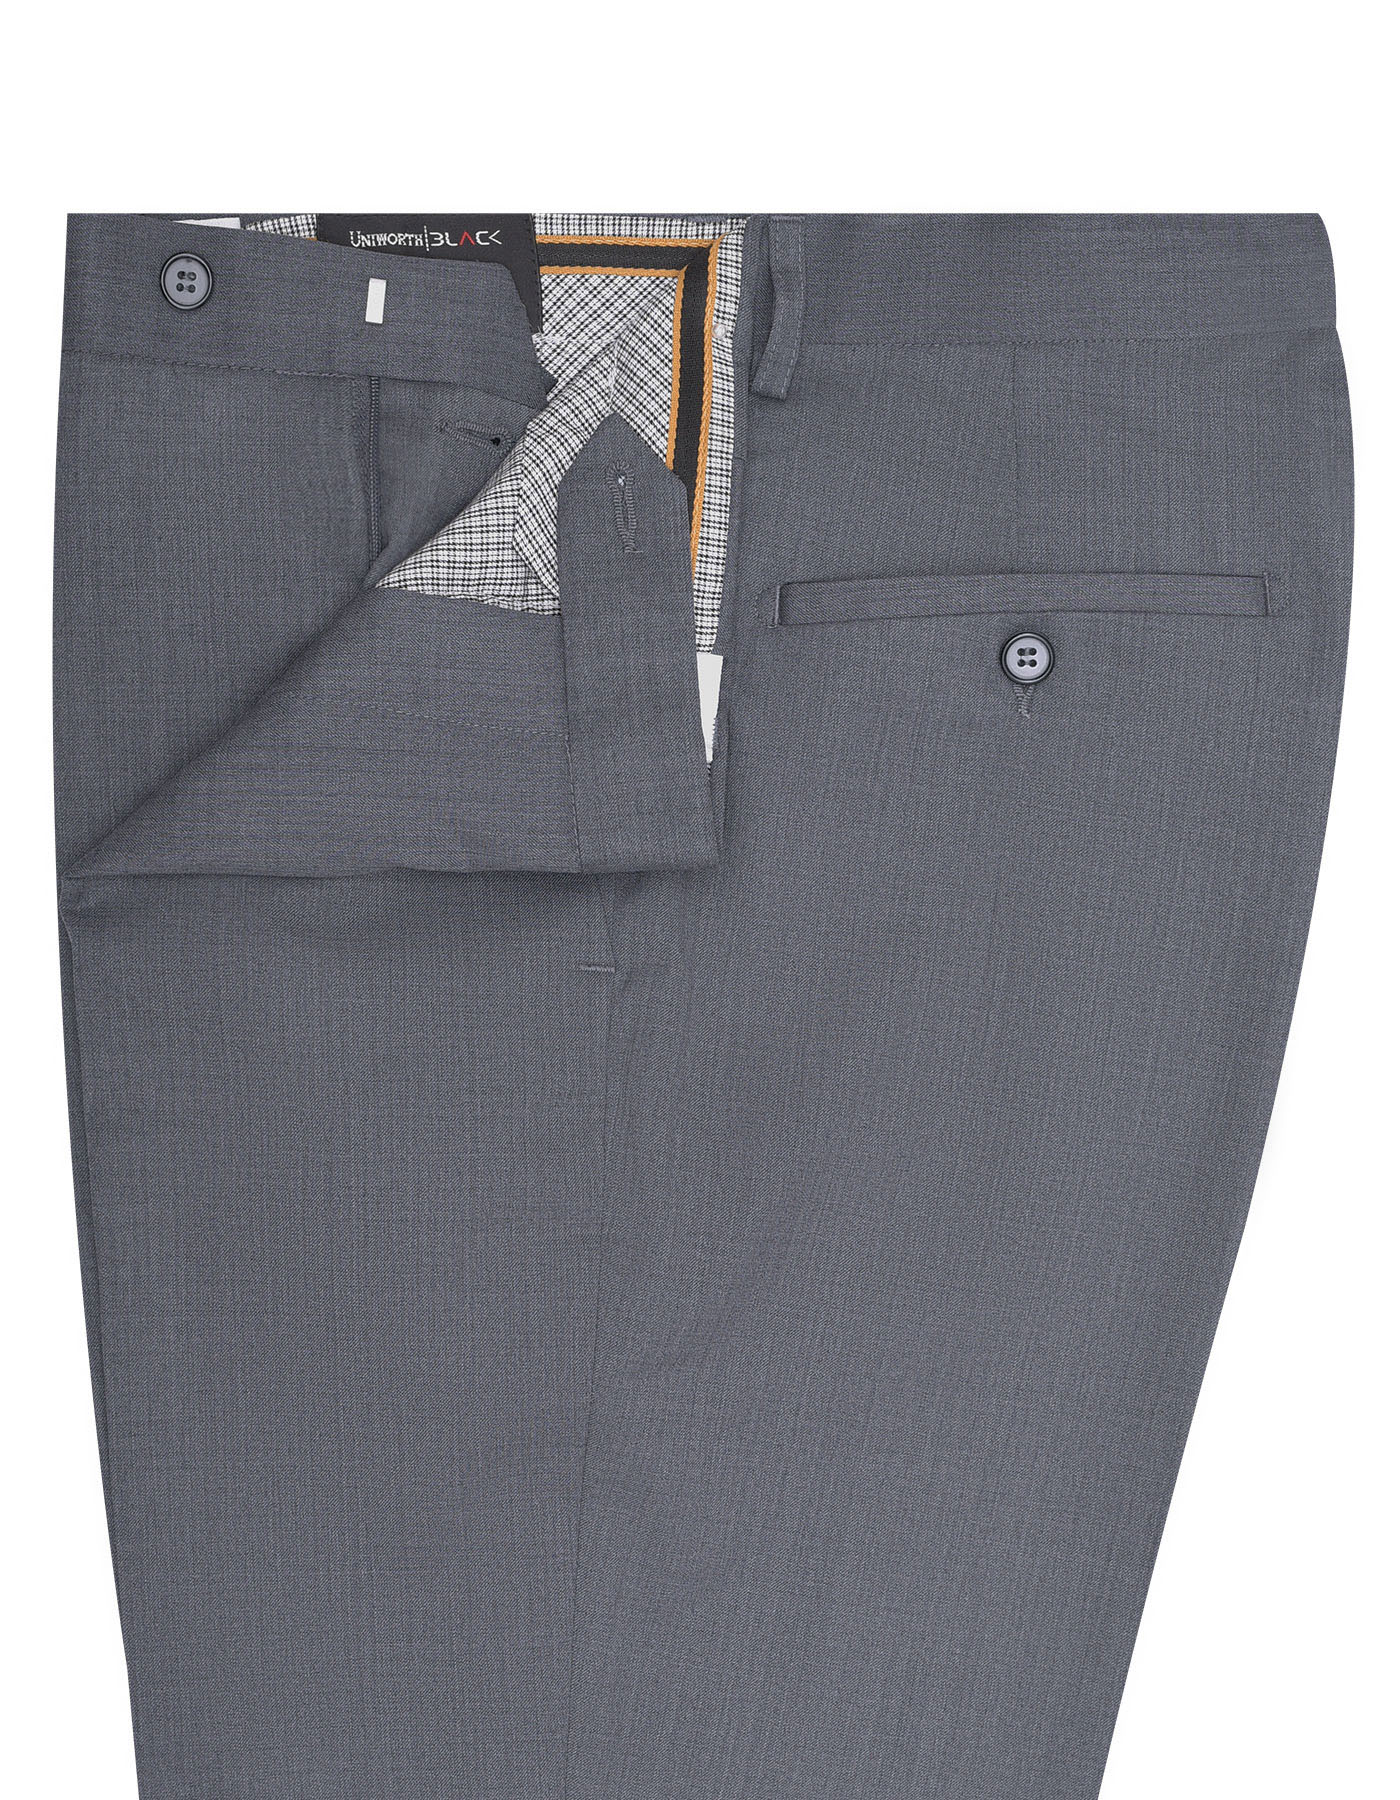 Buy Stylish Mens Formal Pants Online in Pakistan  Chase Value